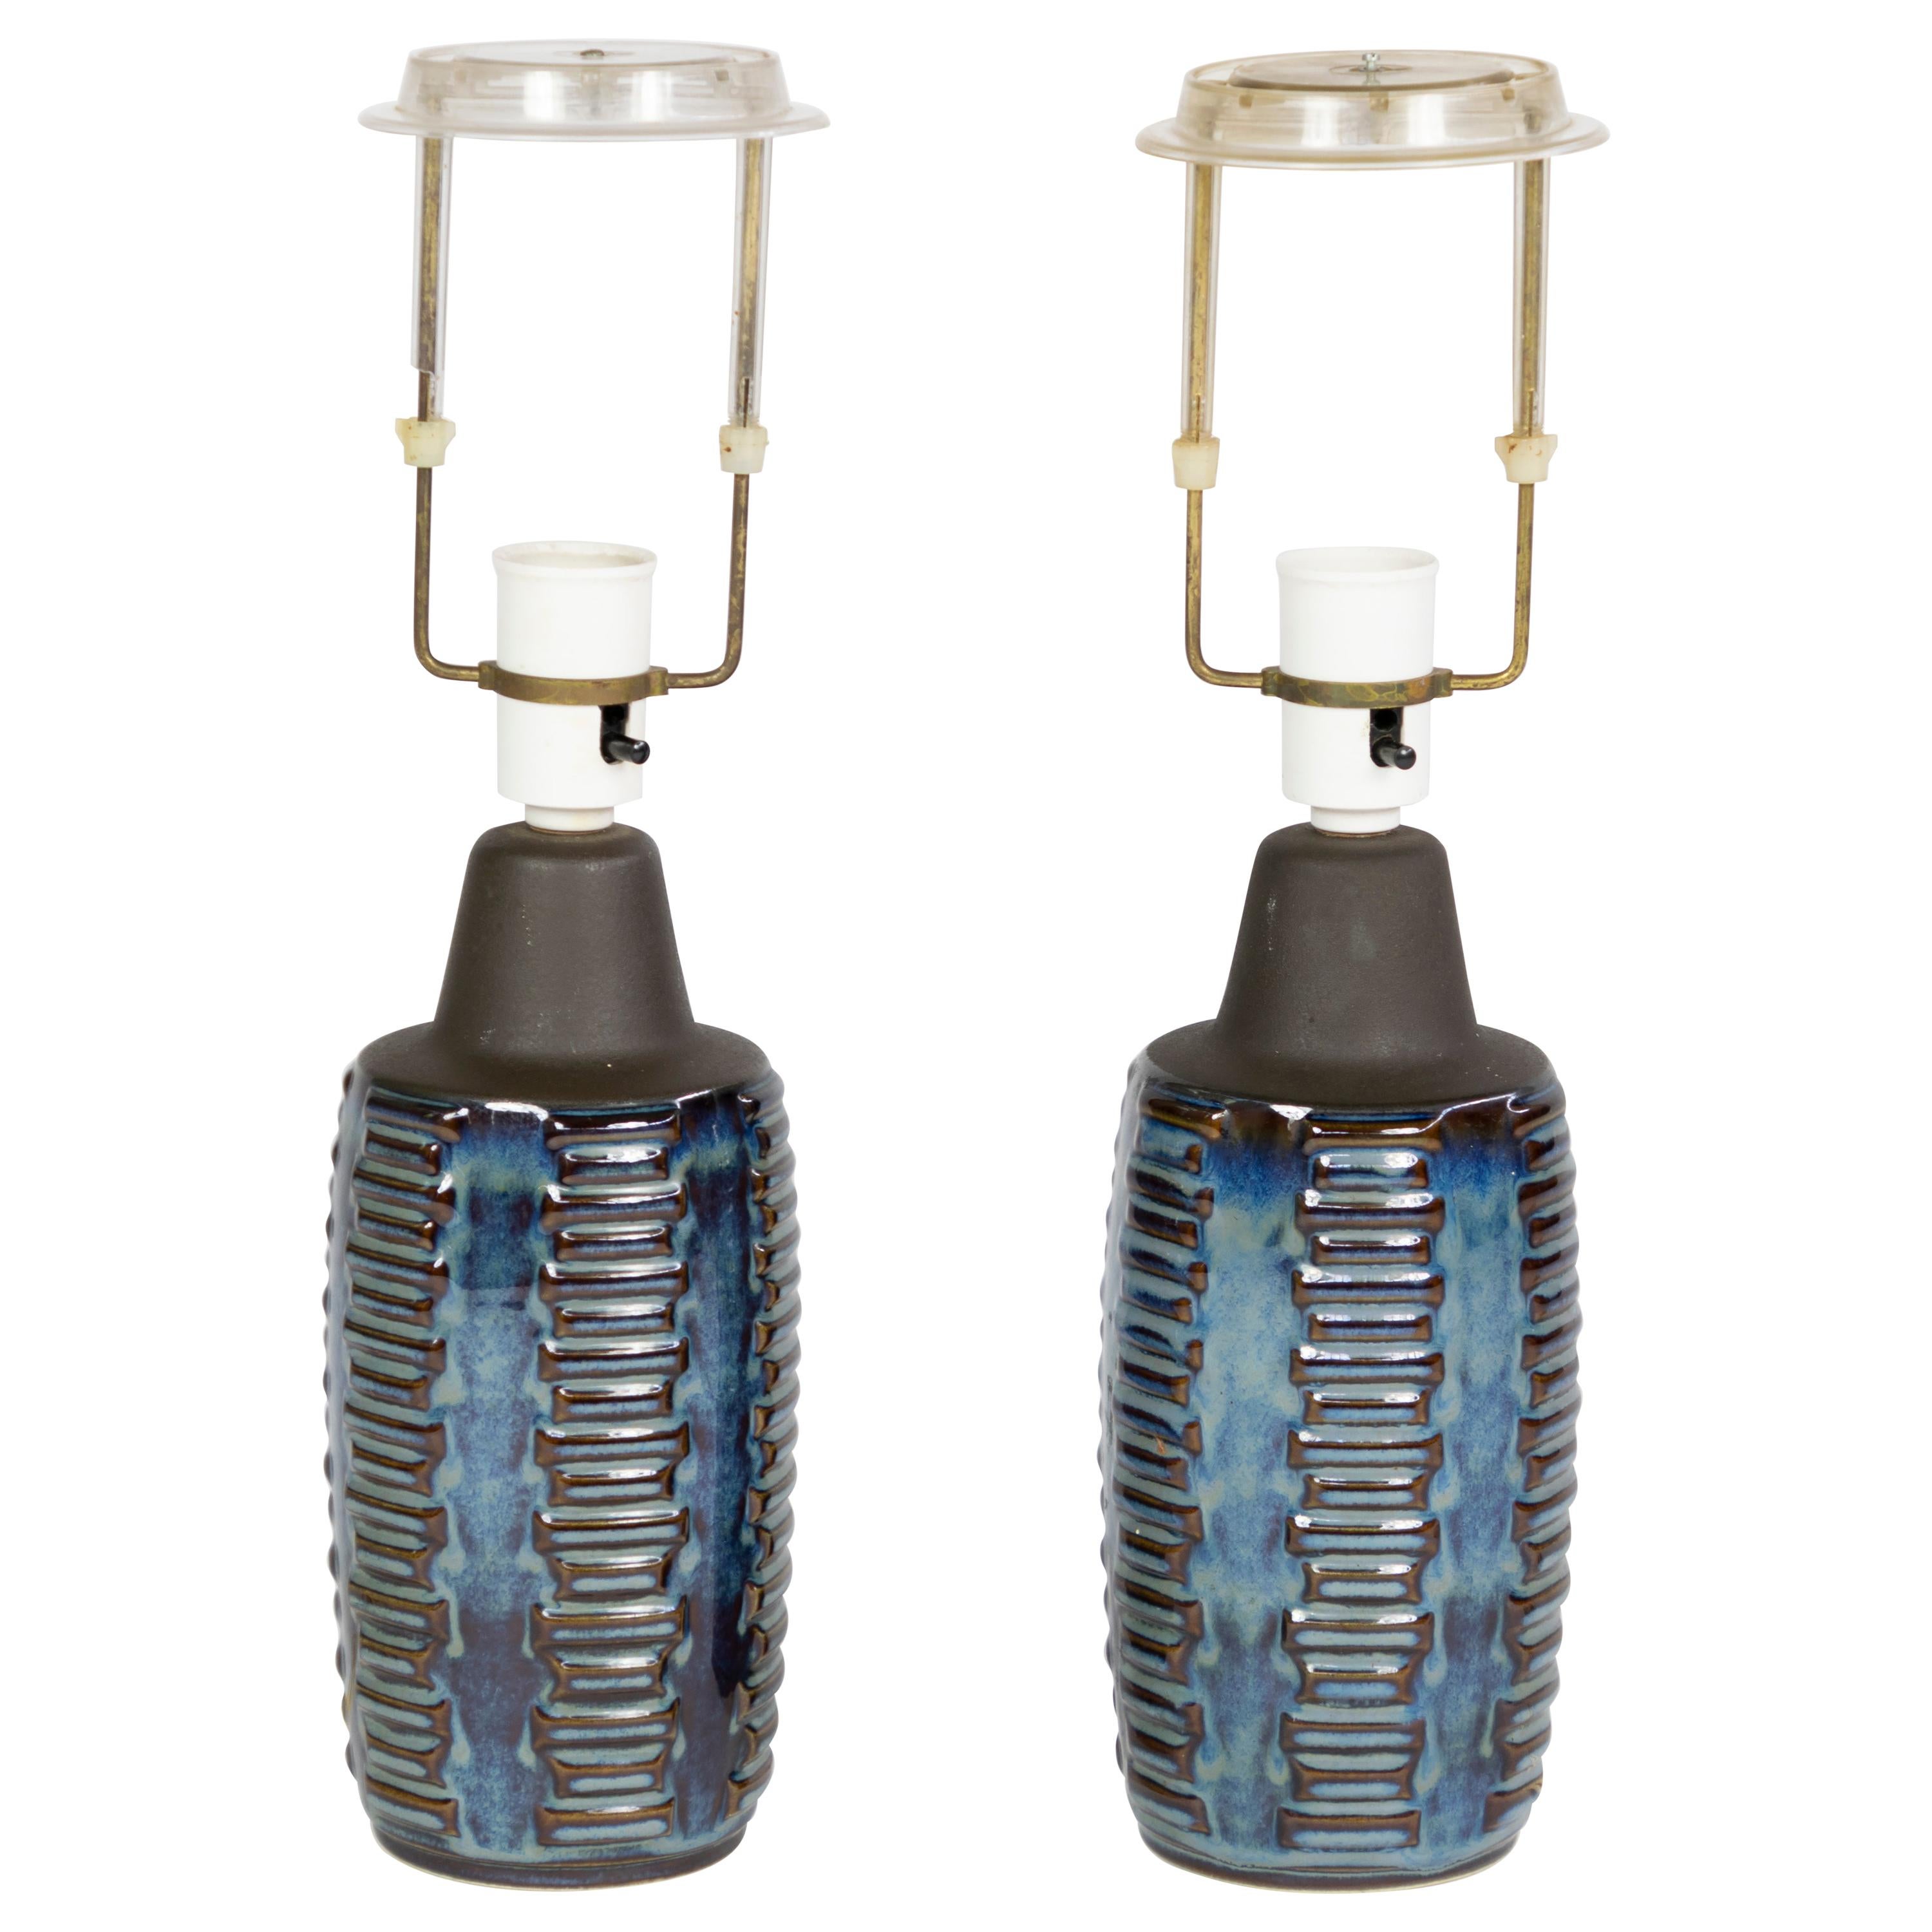 Pair of Two Soholm Table Lamps in Blue, Design by Einer Johansen, Denmark 1960s For Sale